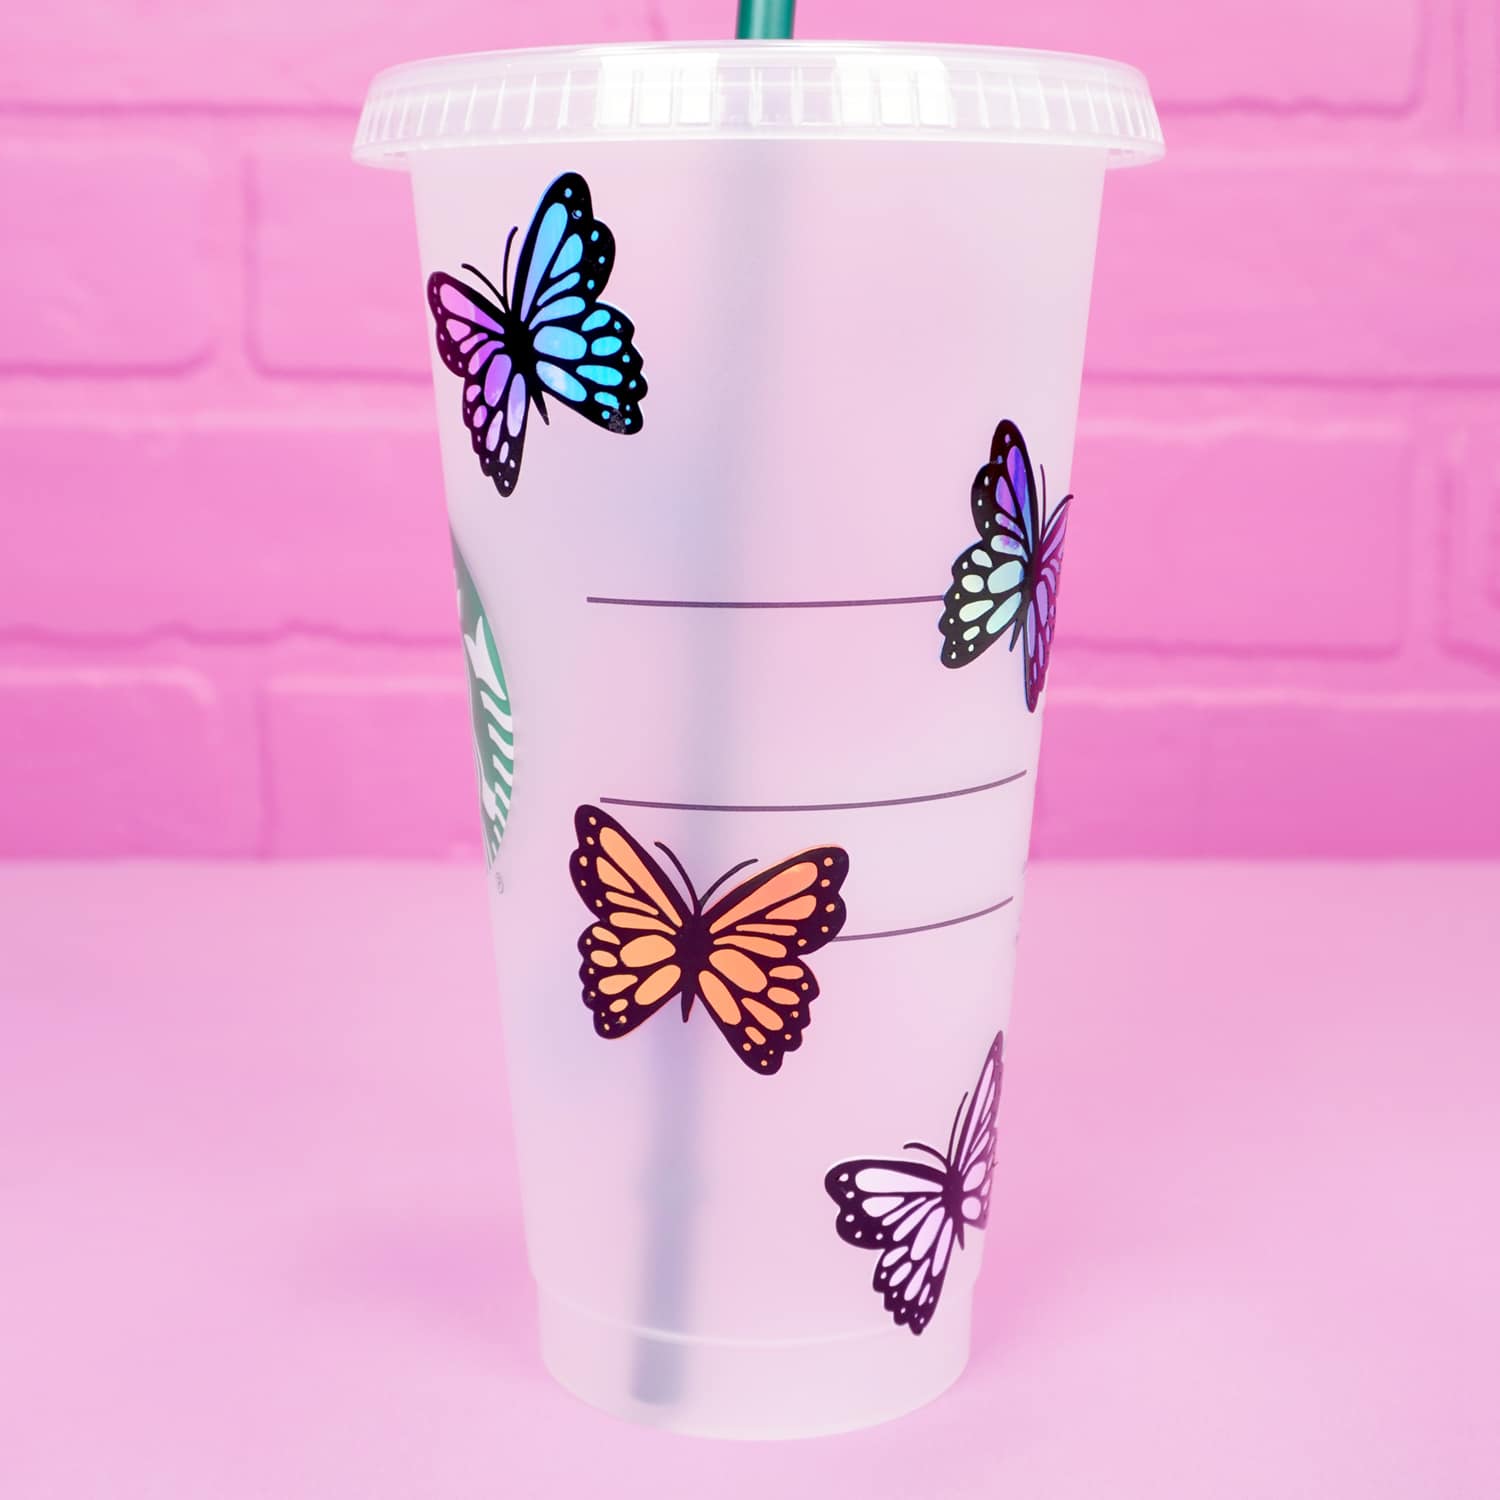 Close up of holographic butterflies on a Starbucks tumbler cup on pink background